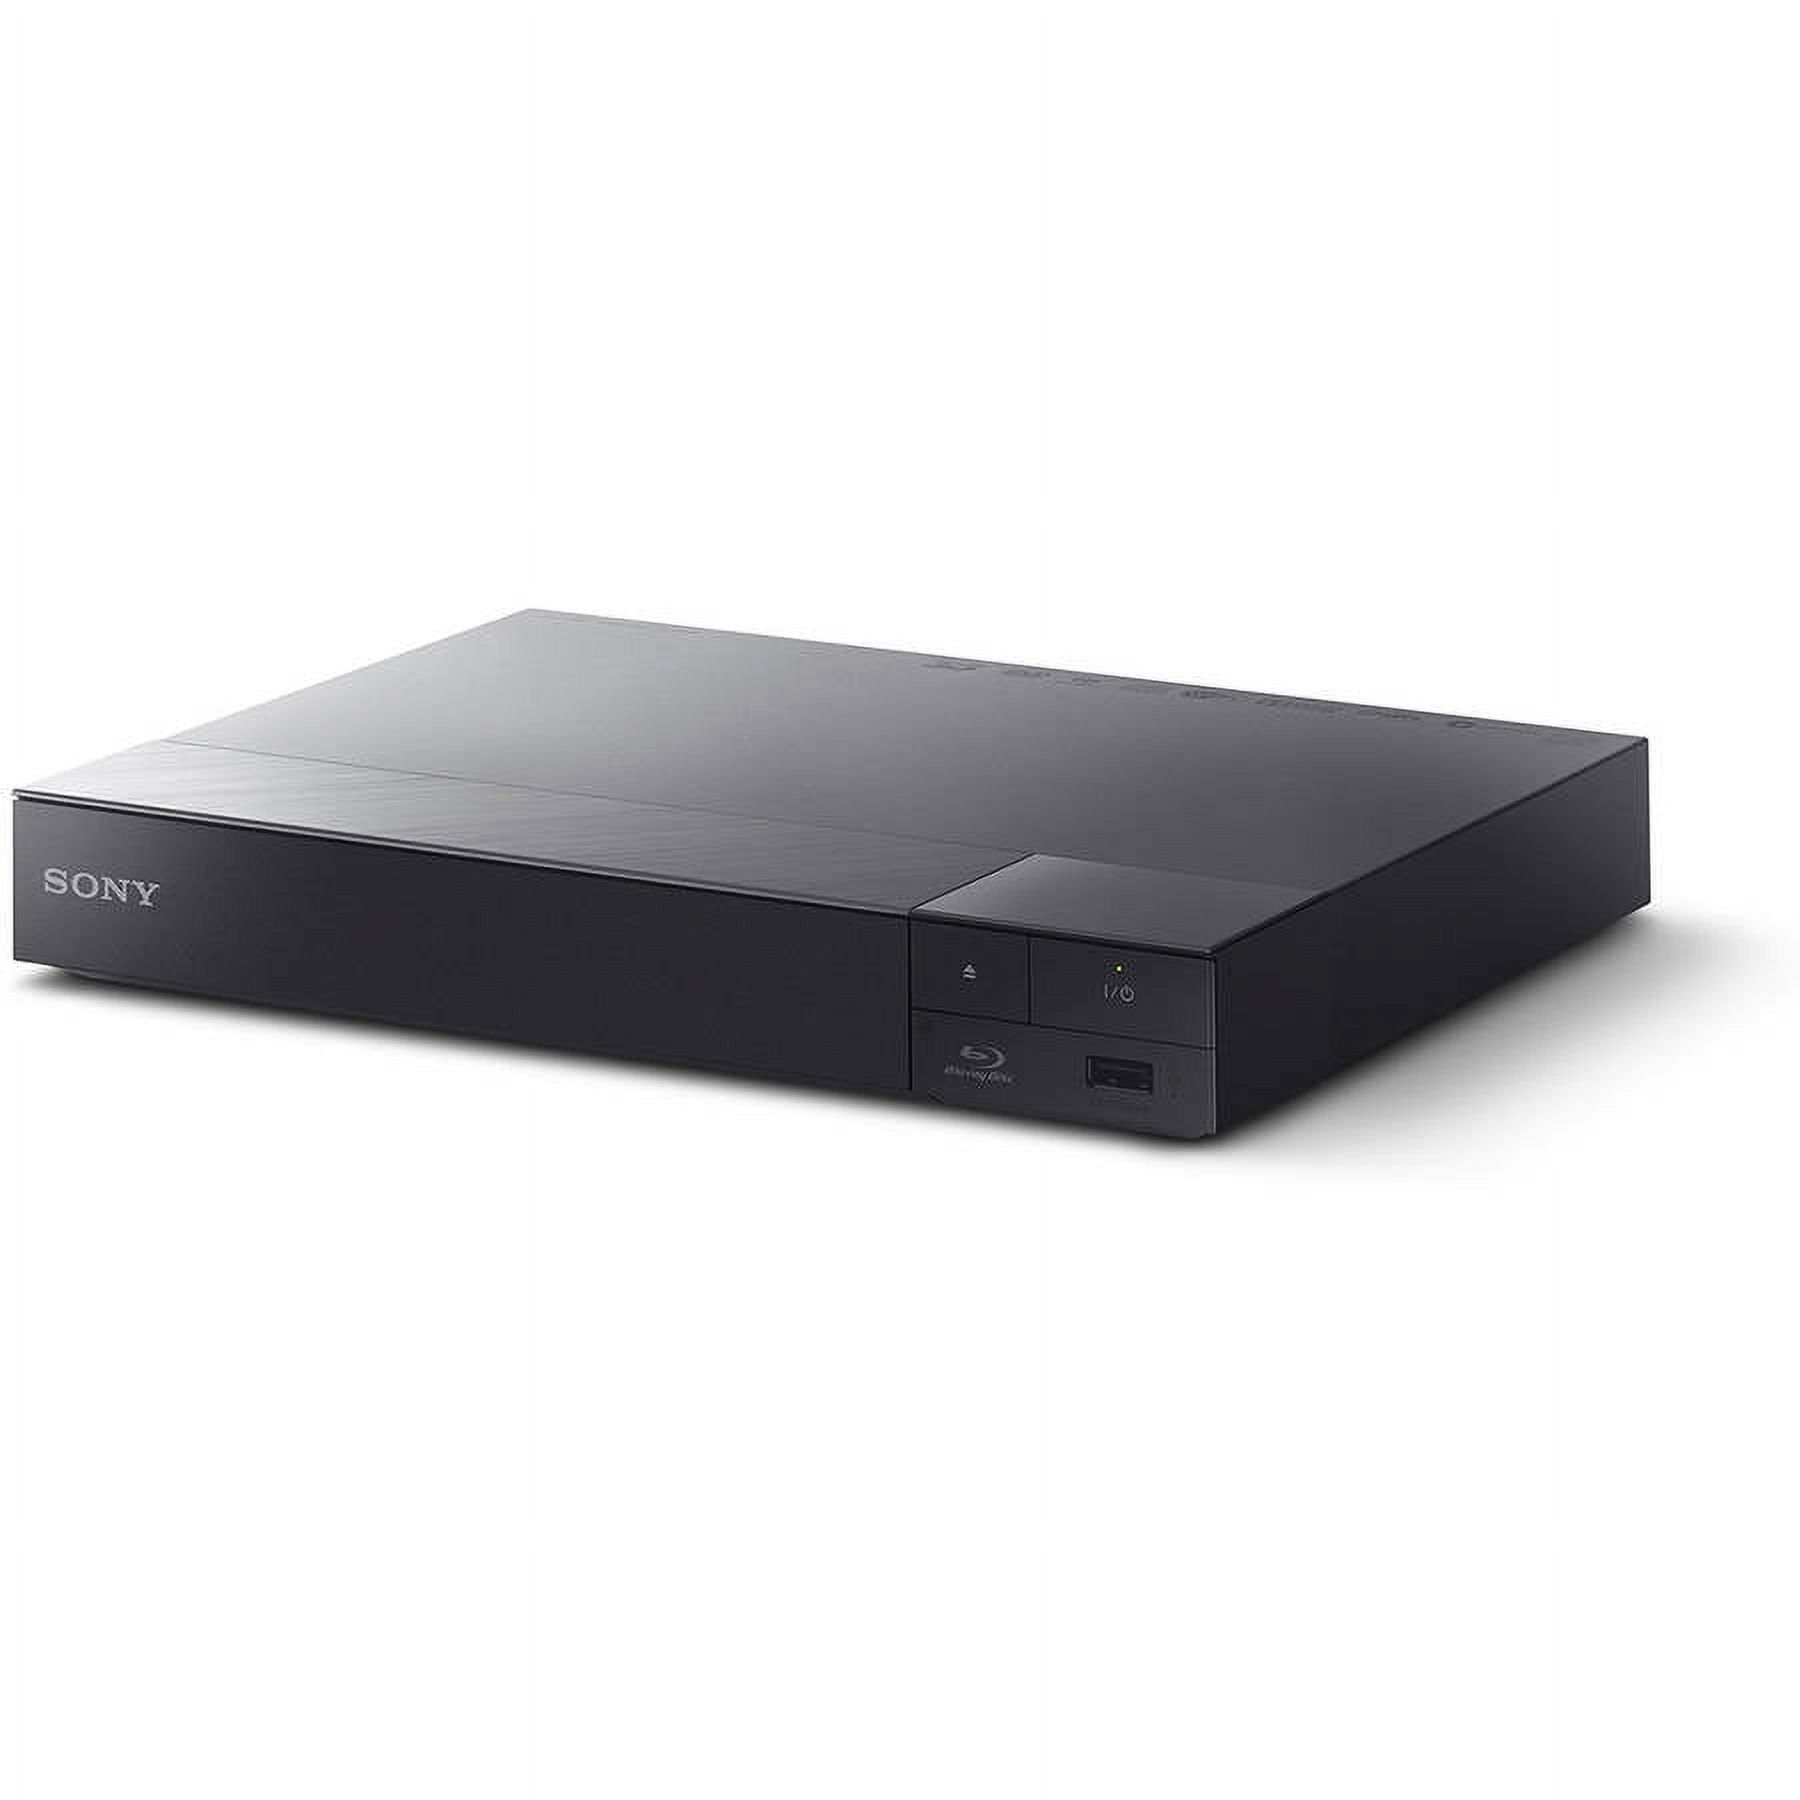 Sony 4K WiFi Blu-ray Disc Player (BDPS6500) - image 2 of 2